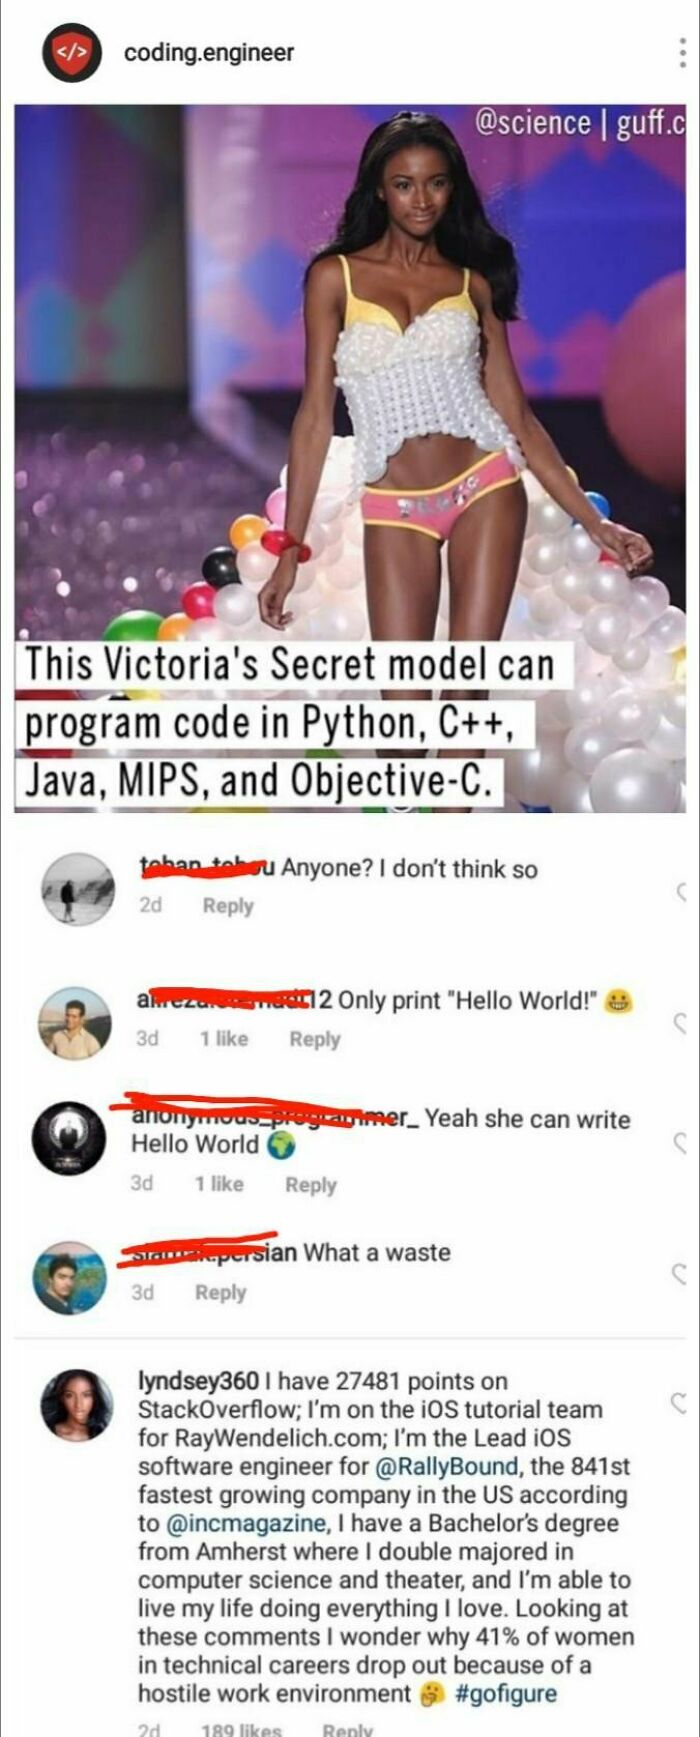 didn't know who talking to - shoe - coding.engineer | guff.c This Victoria's Secret model can program code in Python, C, Java, Mips, and ObjectiveC. tahan tahu Anyone? I don't think so 2d alcza 12 Only print "Hello World!" 3d 1 anonymous prezizurimer_ Yea